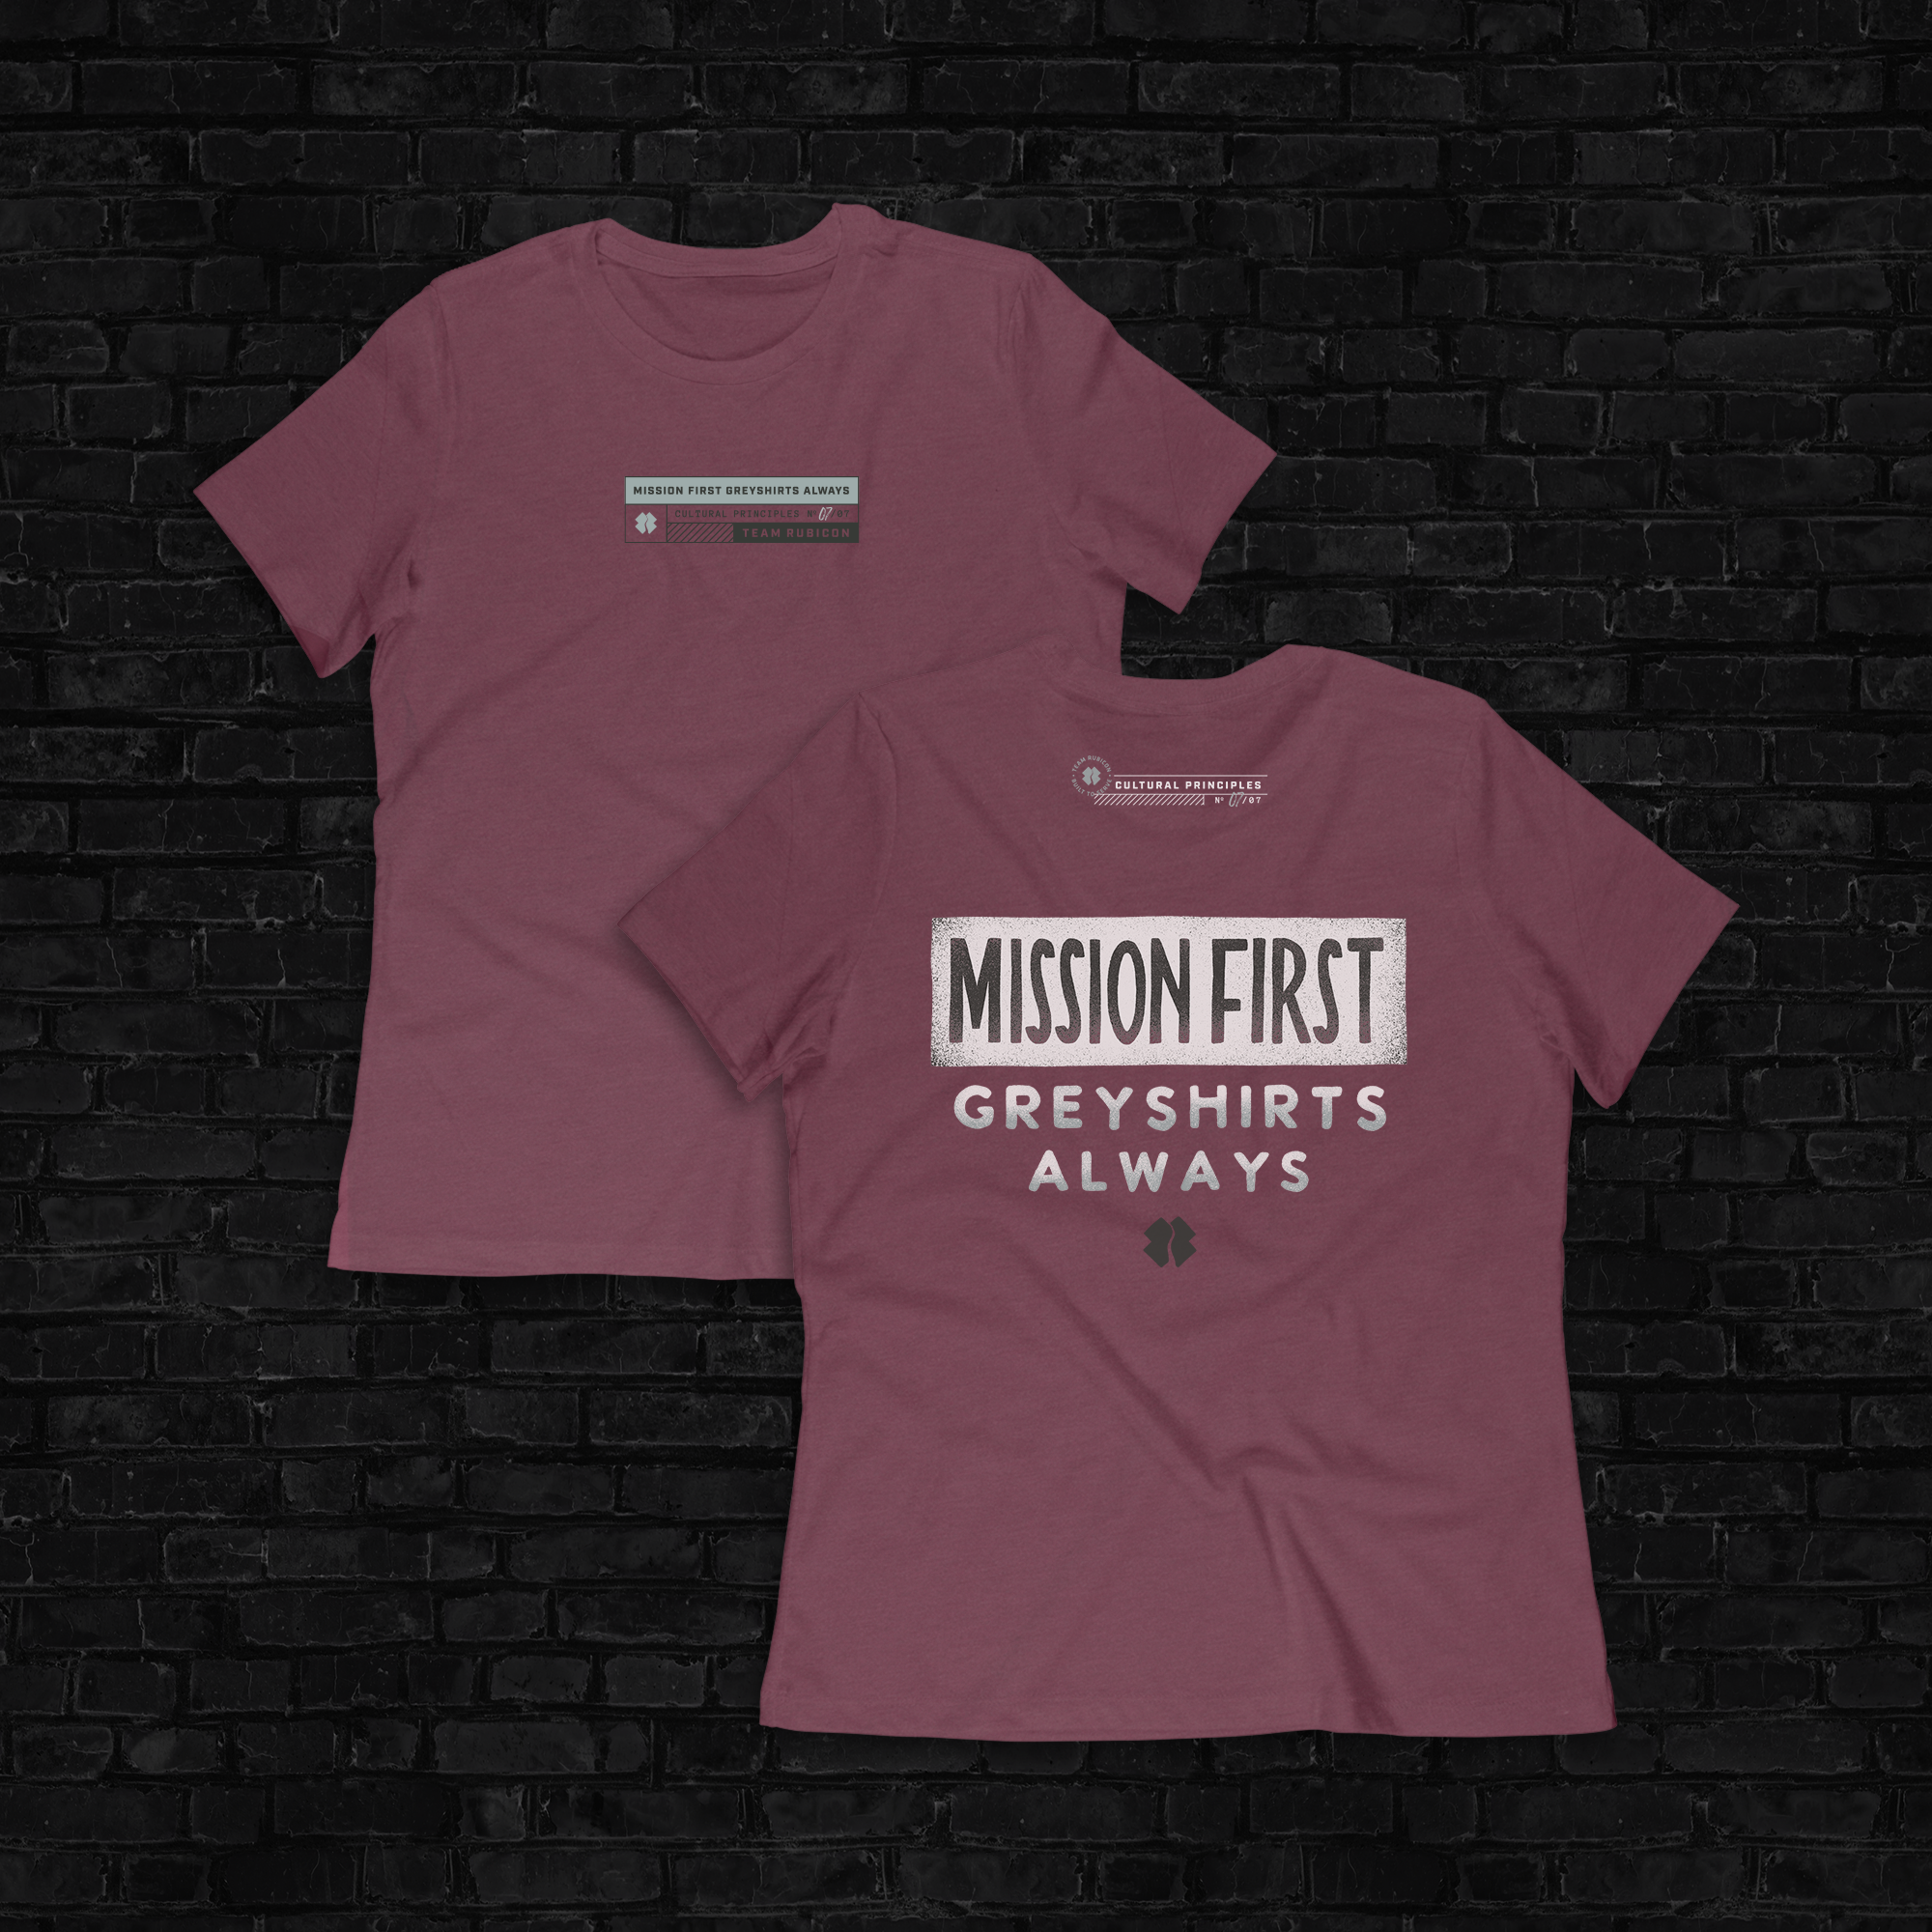 Mission First Greyshirts Always Women's Fitted Shirt